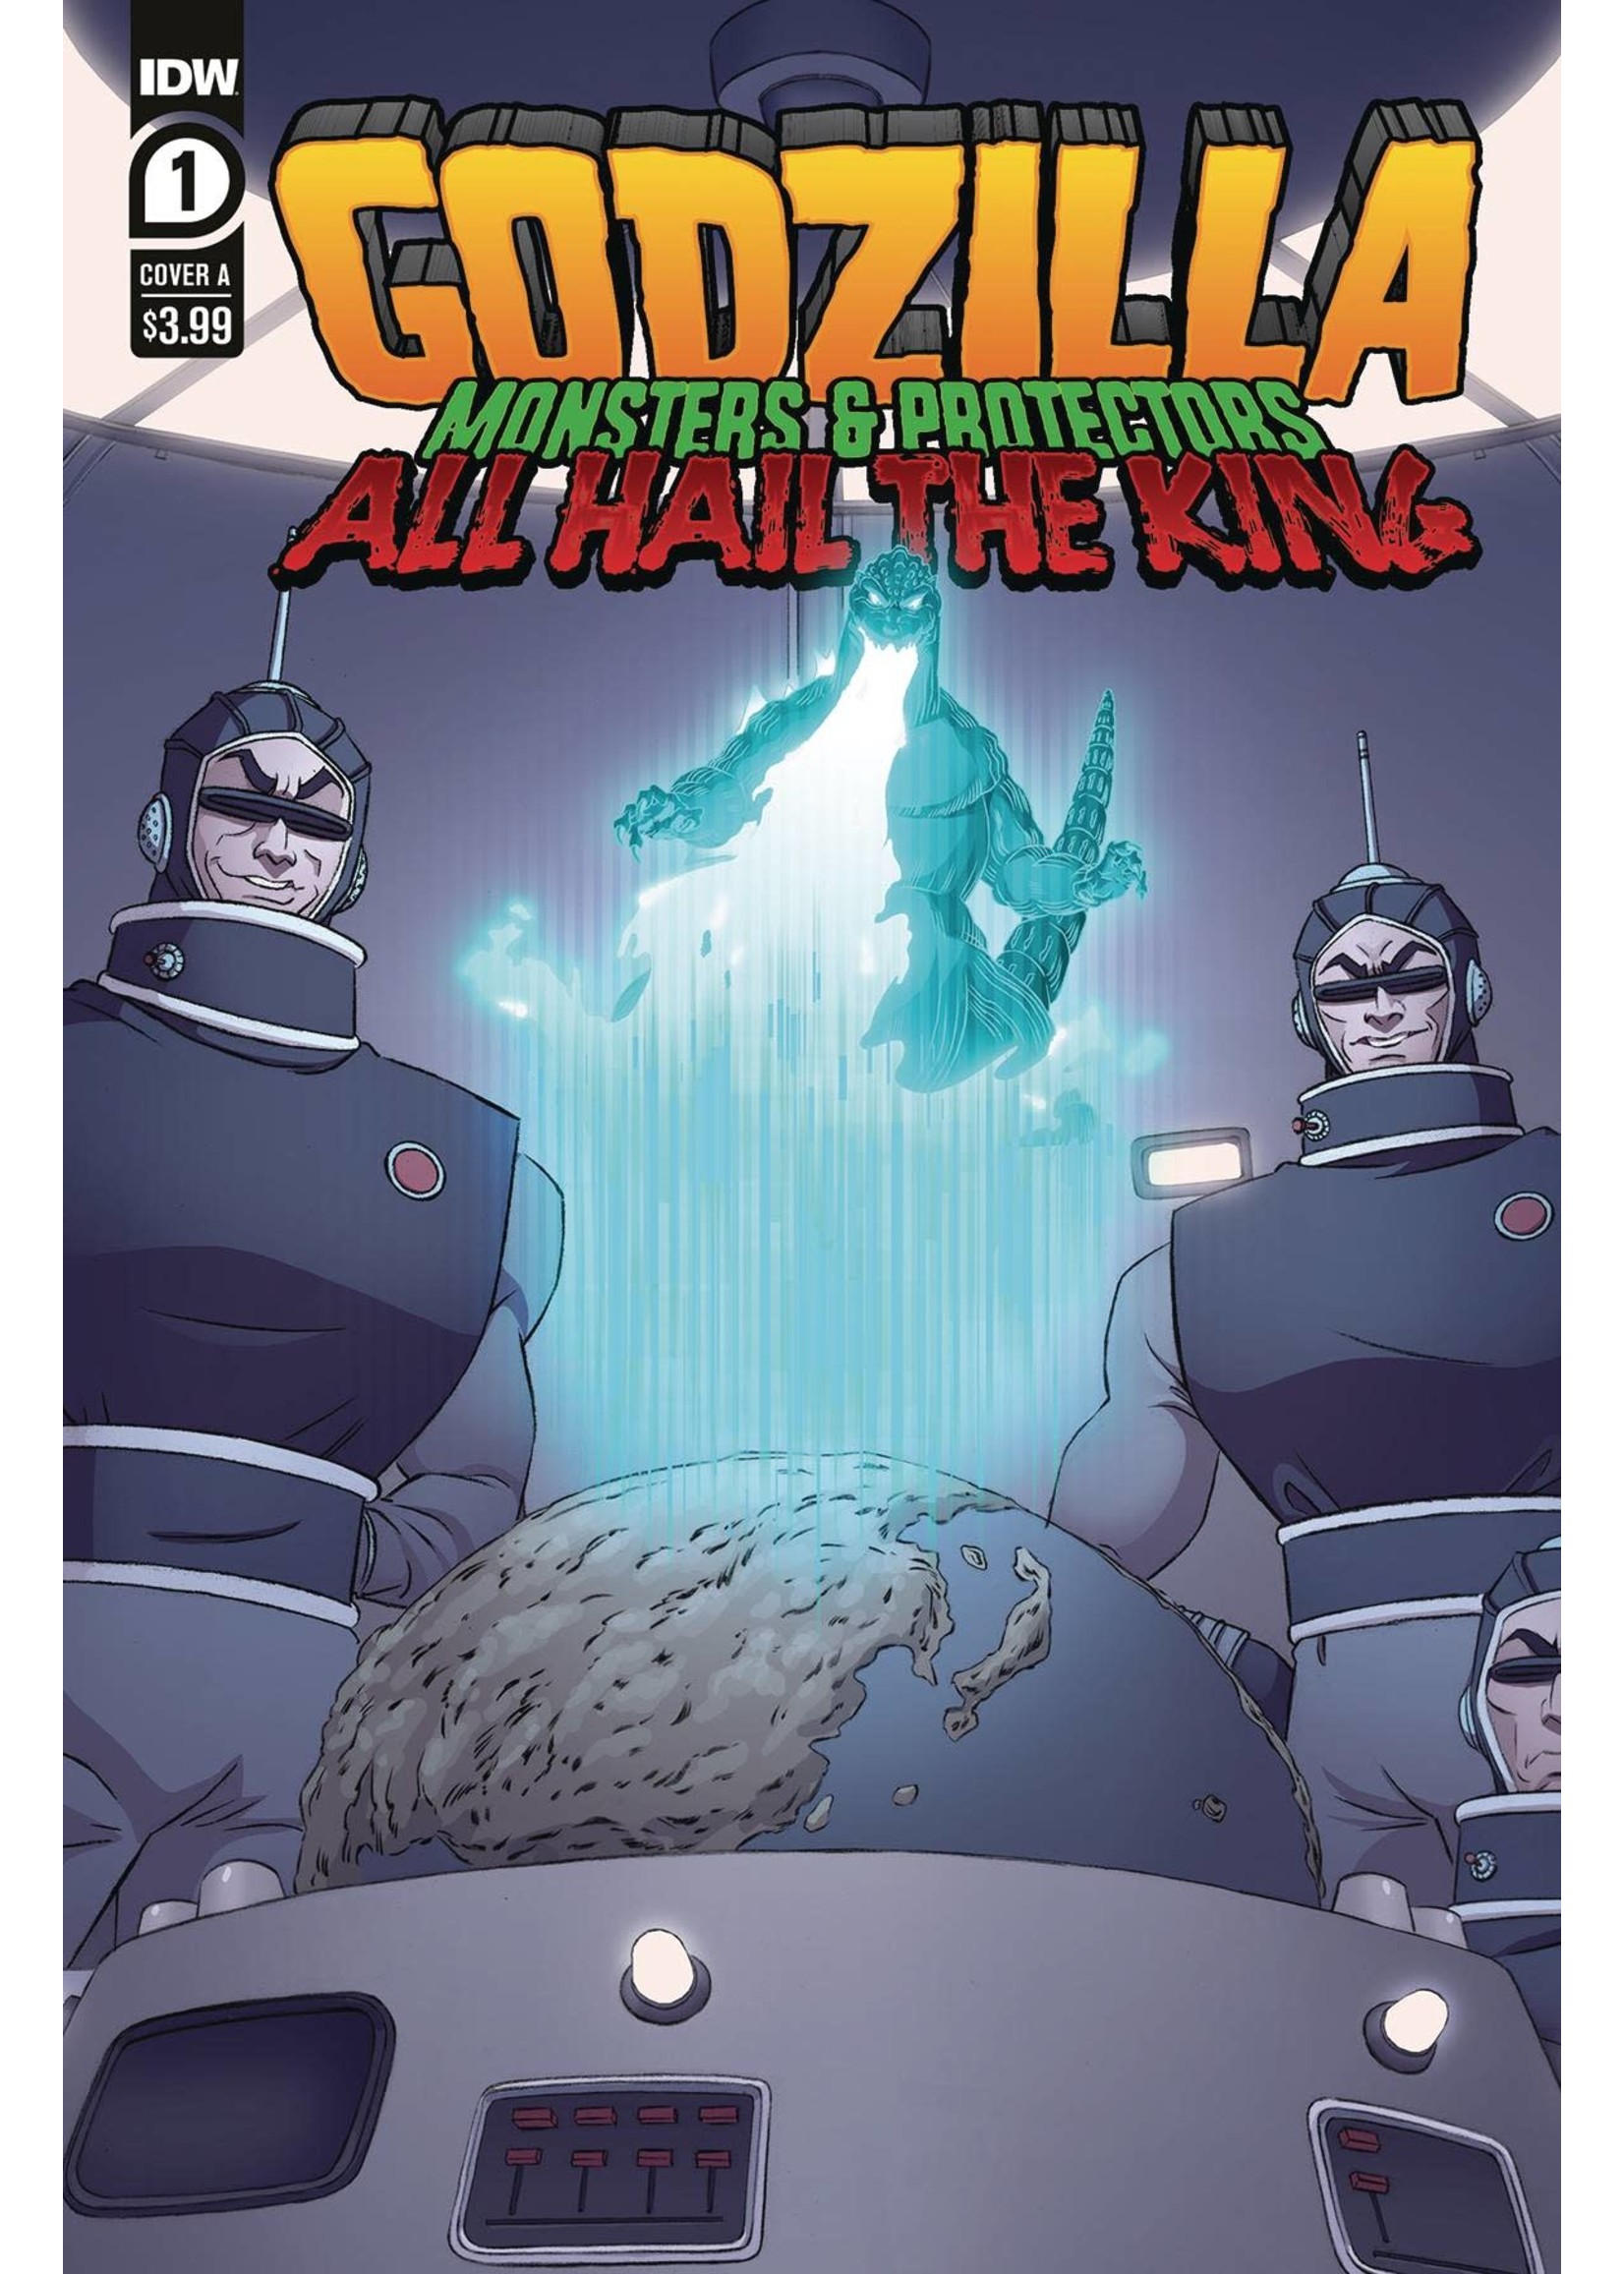 IDW PUBLISHING GODZILLA ALL HAIL THE KING complete 5 issue series